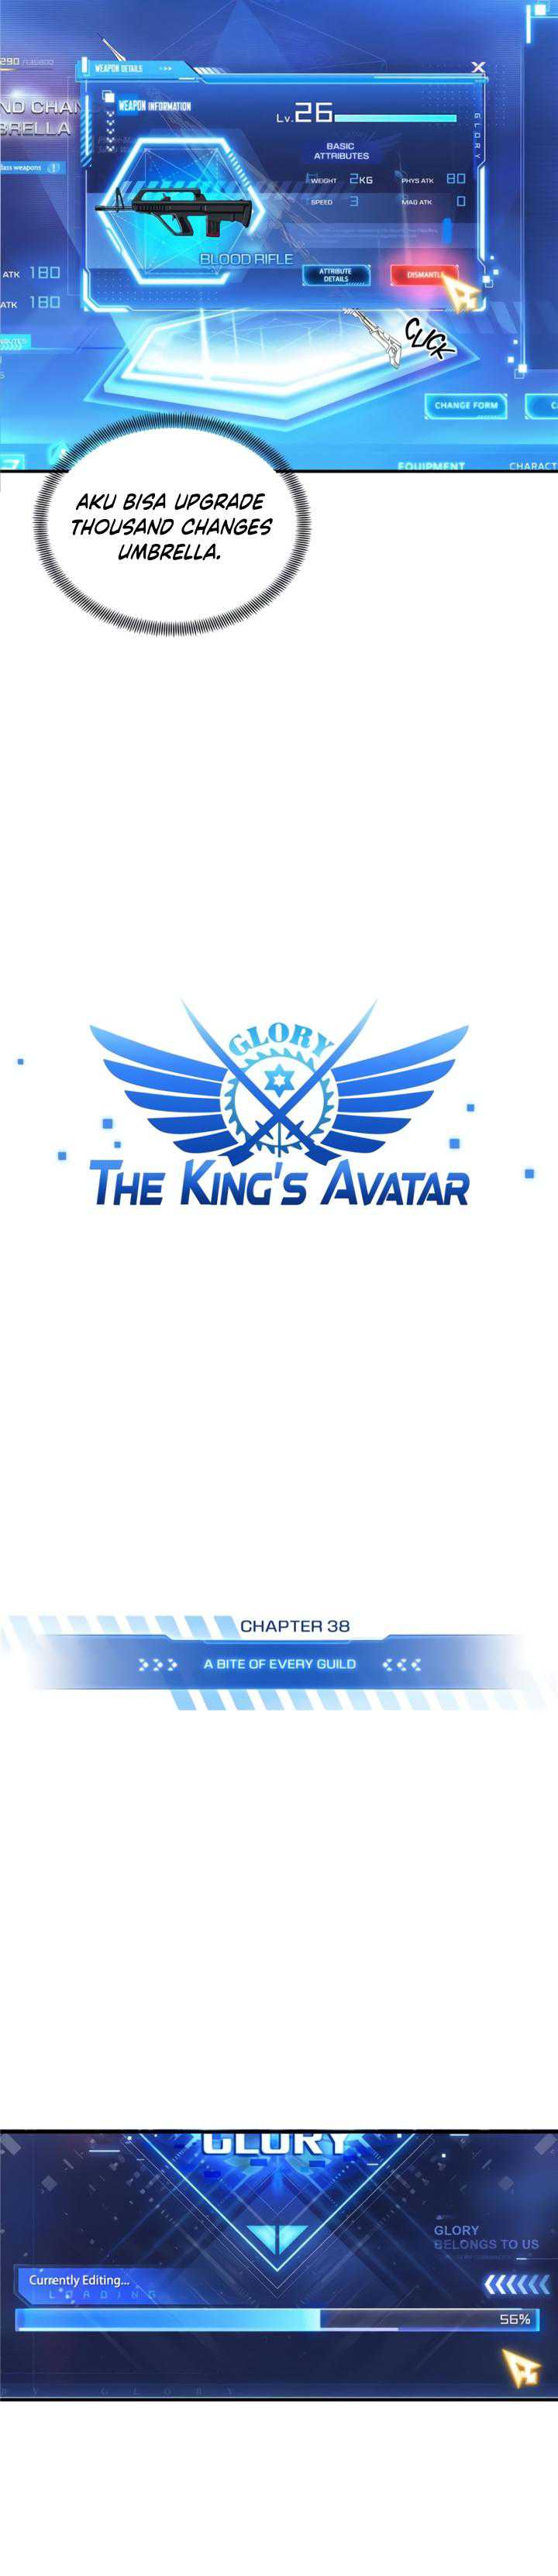 The King’s Avatar Chapter 38